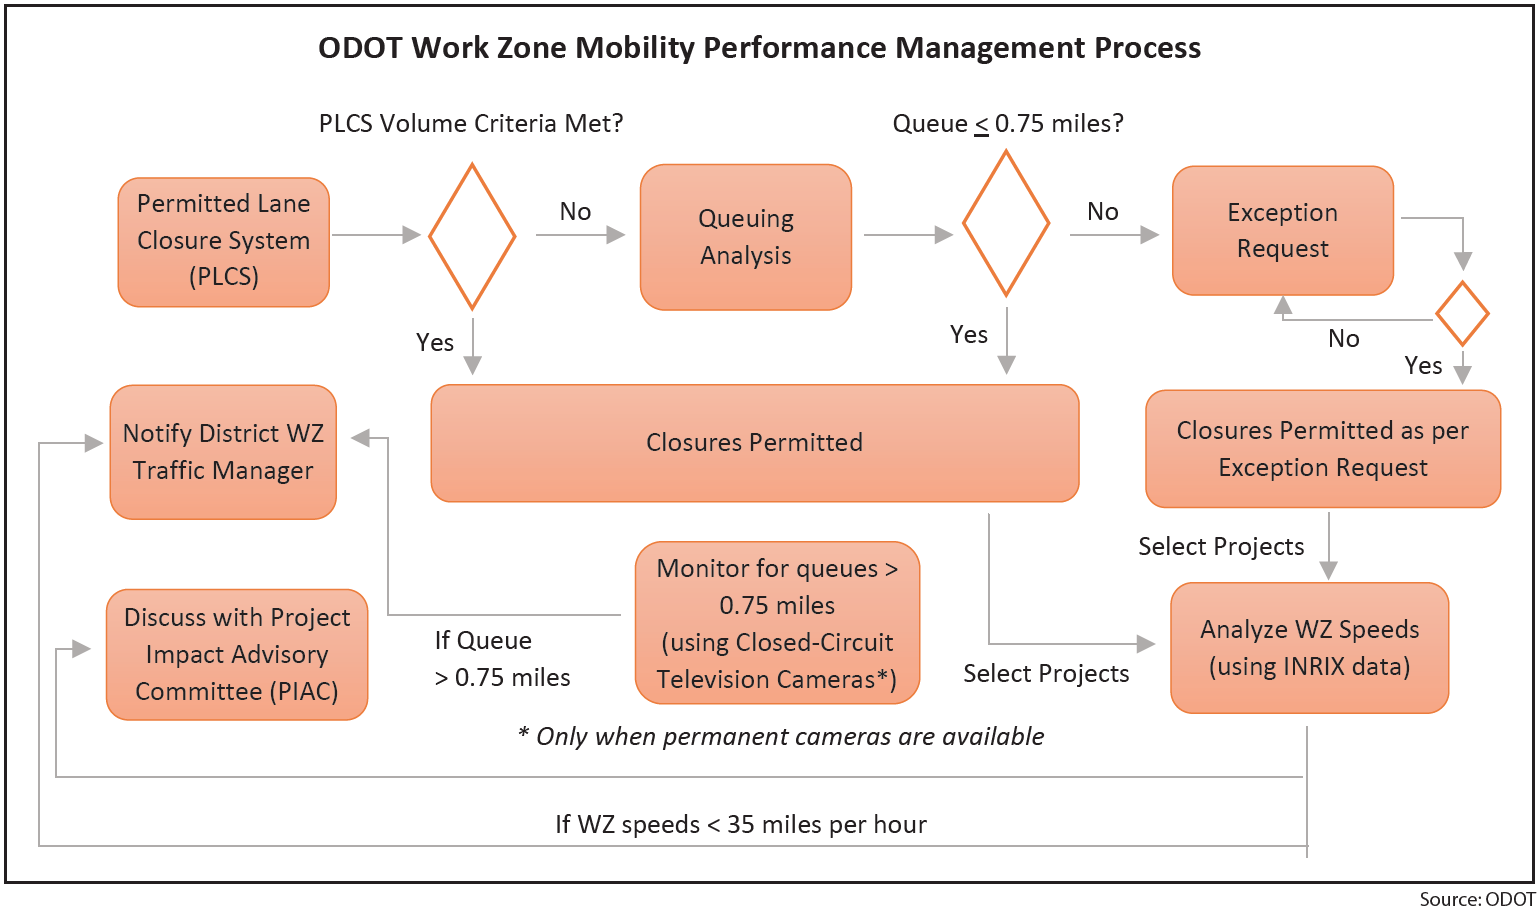 Flowchart illustrating the work zone mobility performance management process. If a lane closure is not permitted an exception request must be granted. Then the work zone speed is analyzed using INRIX data for selected projects.  If speeds are less than 35 miles an hour notify the district work zone traffic manager, else discuss the project with the Project Impact Advisory Committee.